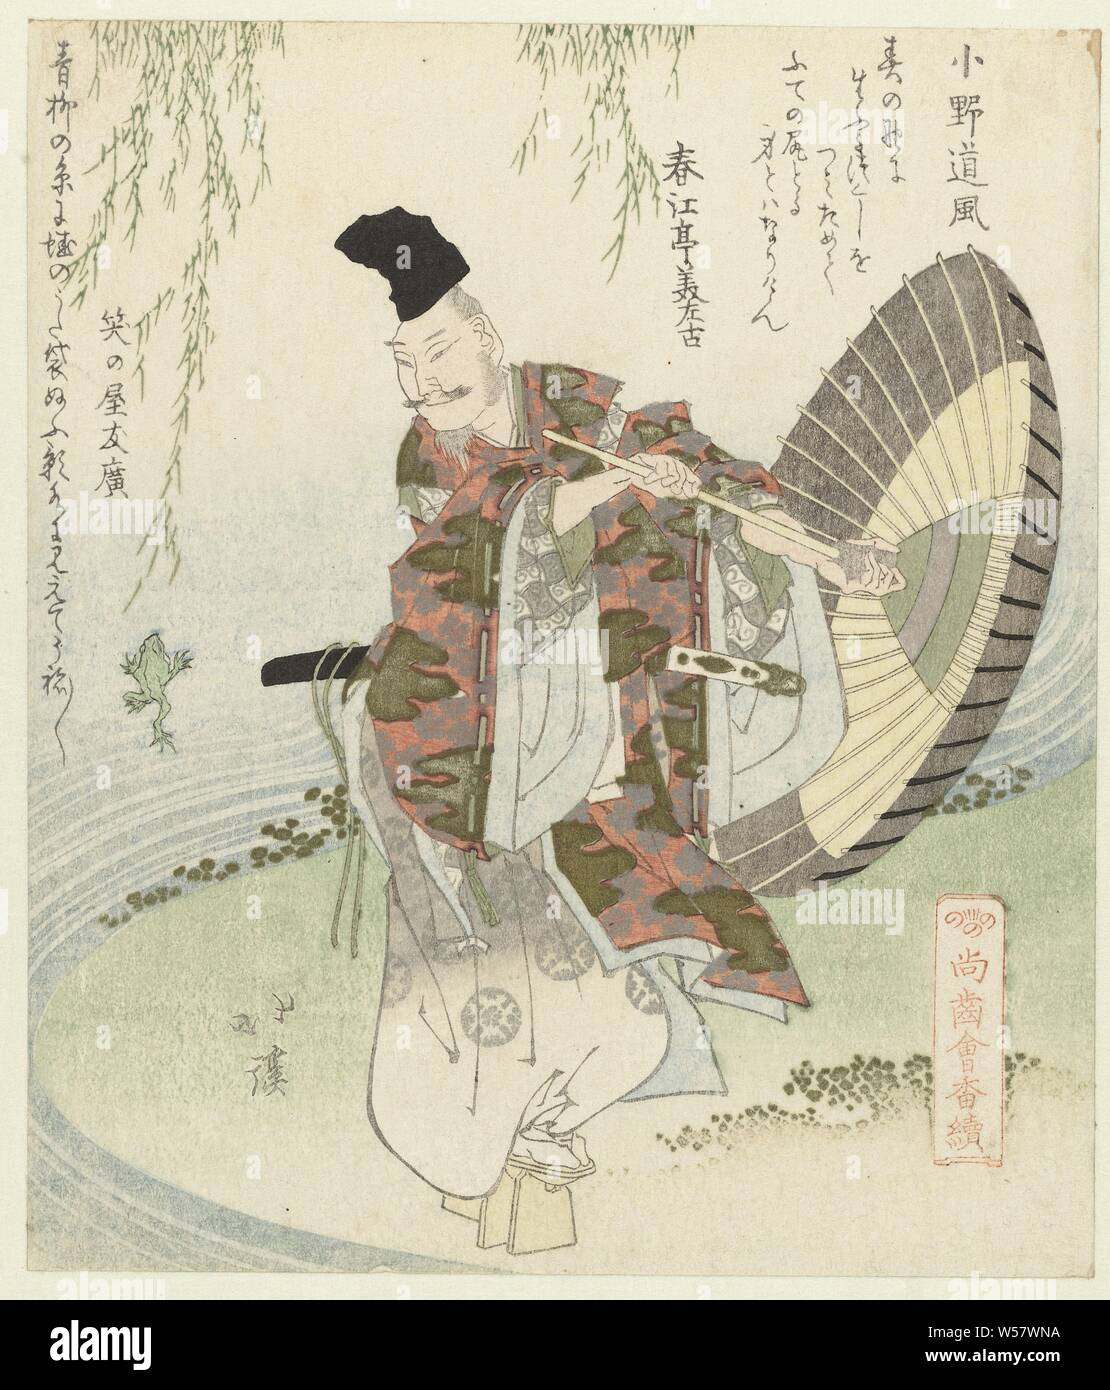 The poet Ono no Tôfû Ono no Tôfû (title on object) A series about those who still have their teeth (series title) Shôshikai bantsuzuki (series title on object), Ono no Tôfû, or Michikaze (894-966) with a parasol in his hand, looking at a jumping frog. Ono no Tôfû was one of the big three calligraphers during the Heian period (794-1185). This performance refers to an event from his youth when he decided to continue his writer's career at the edge of a pond, after he saw frog making endless attempts to jump to a willow branch. With two poems., Totoya Hokkei (mentioned on object), Japan, c. 1822 Stock Photo